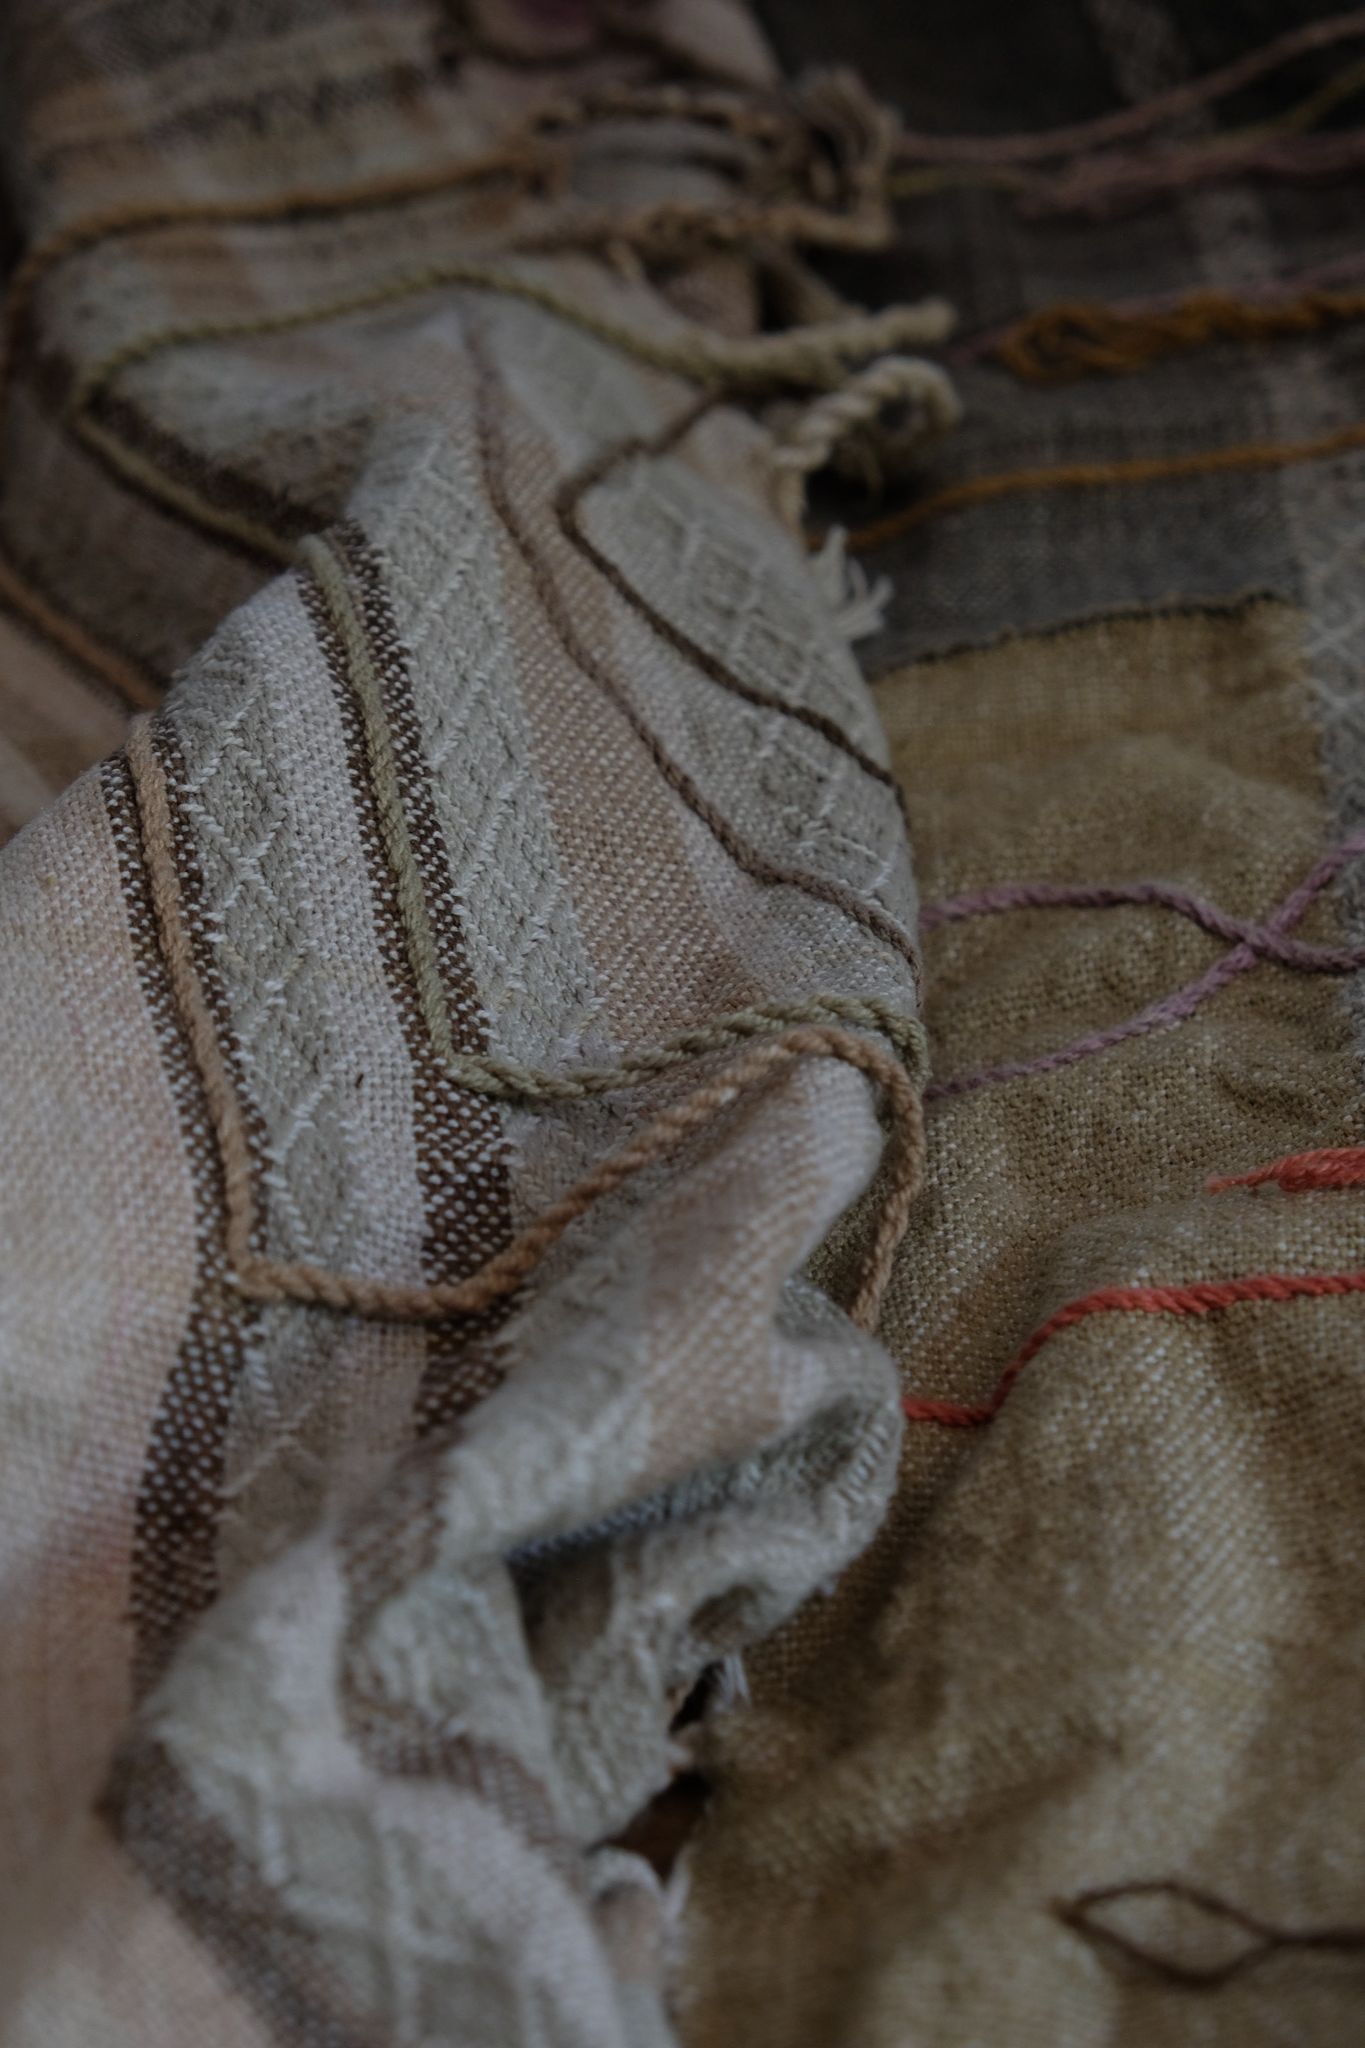 Handwoven fabric in soft shades of grey, pink, yellow and earth laying on a wooden floor